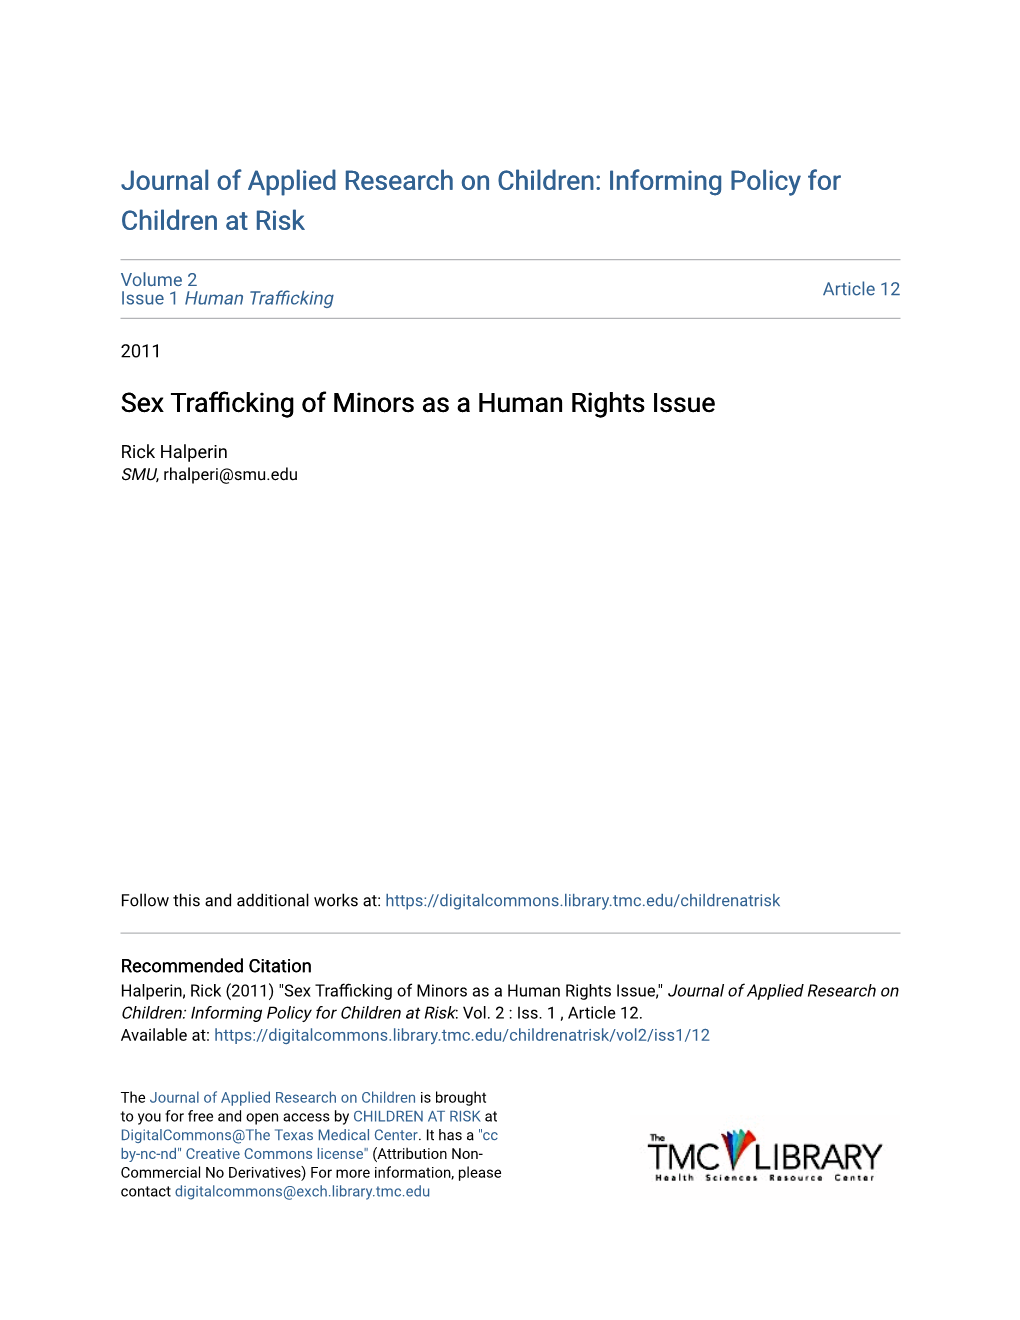 Sex Trafficking of Minors As a Human Rights Issue